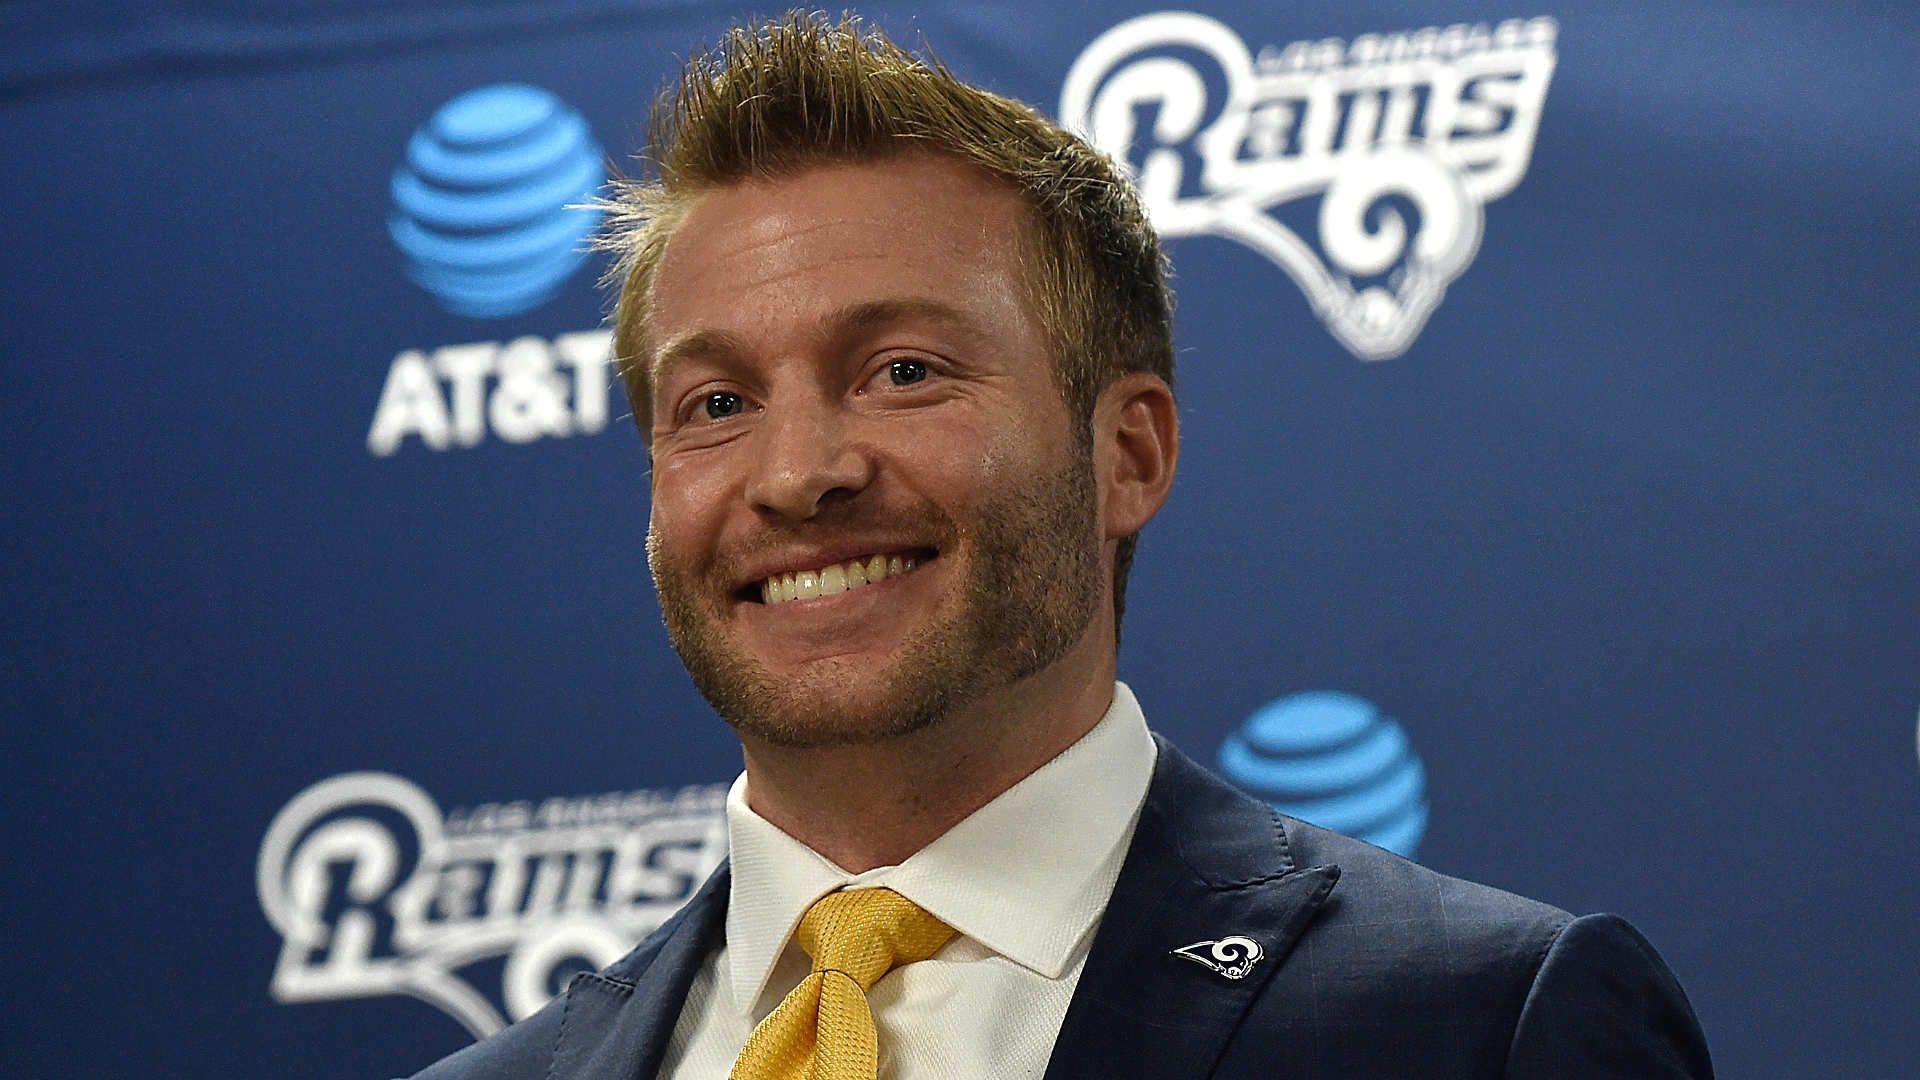 Sean McVay says Rams will 'start from scratch' with Jared Goff. NFL